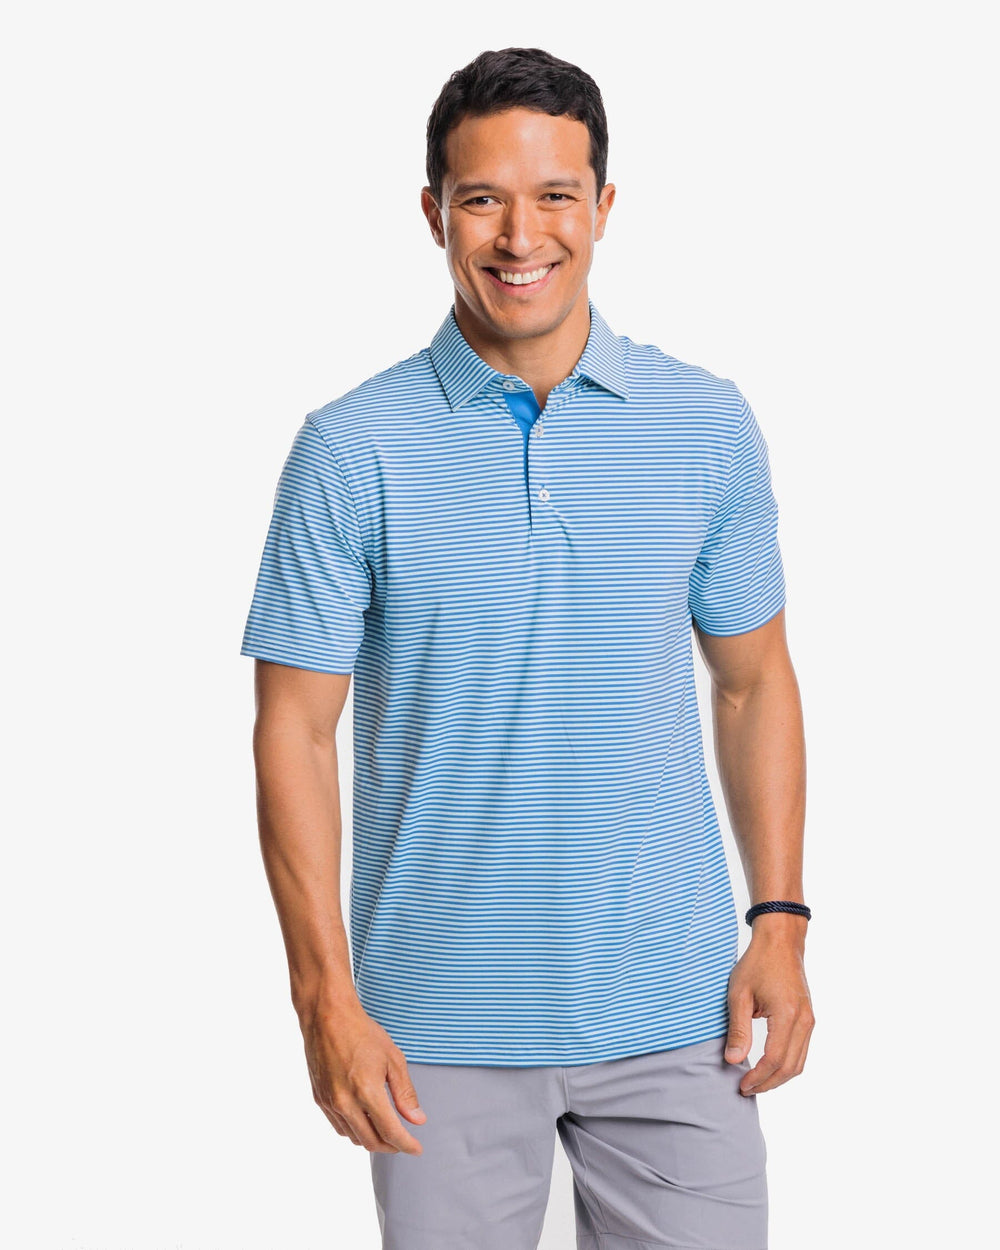 The front view of the Southern Tide Shores Stripe brrr eeze Performance Polo Shirt by Southern Tide - Baltic Teal